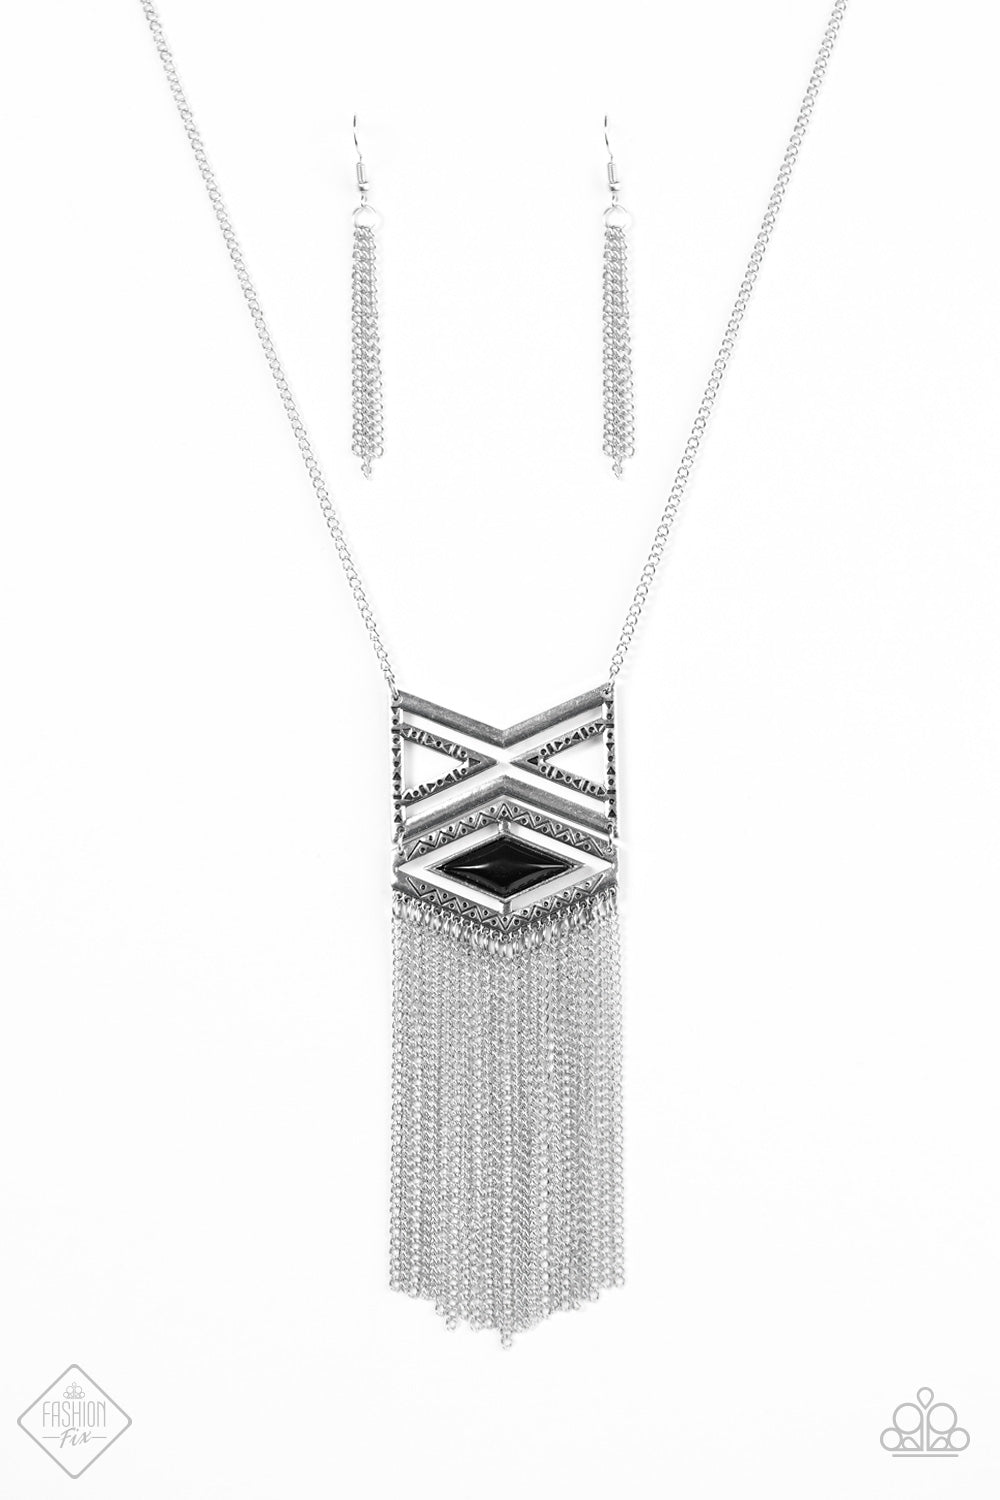 TRIBAL by Fire - Paparazzi necklace